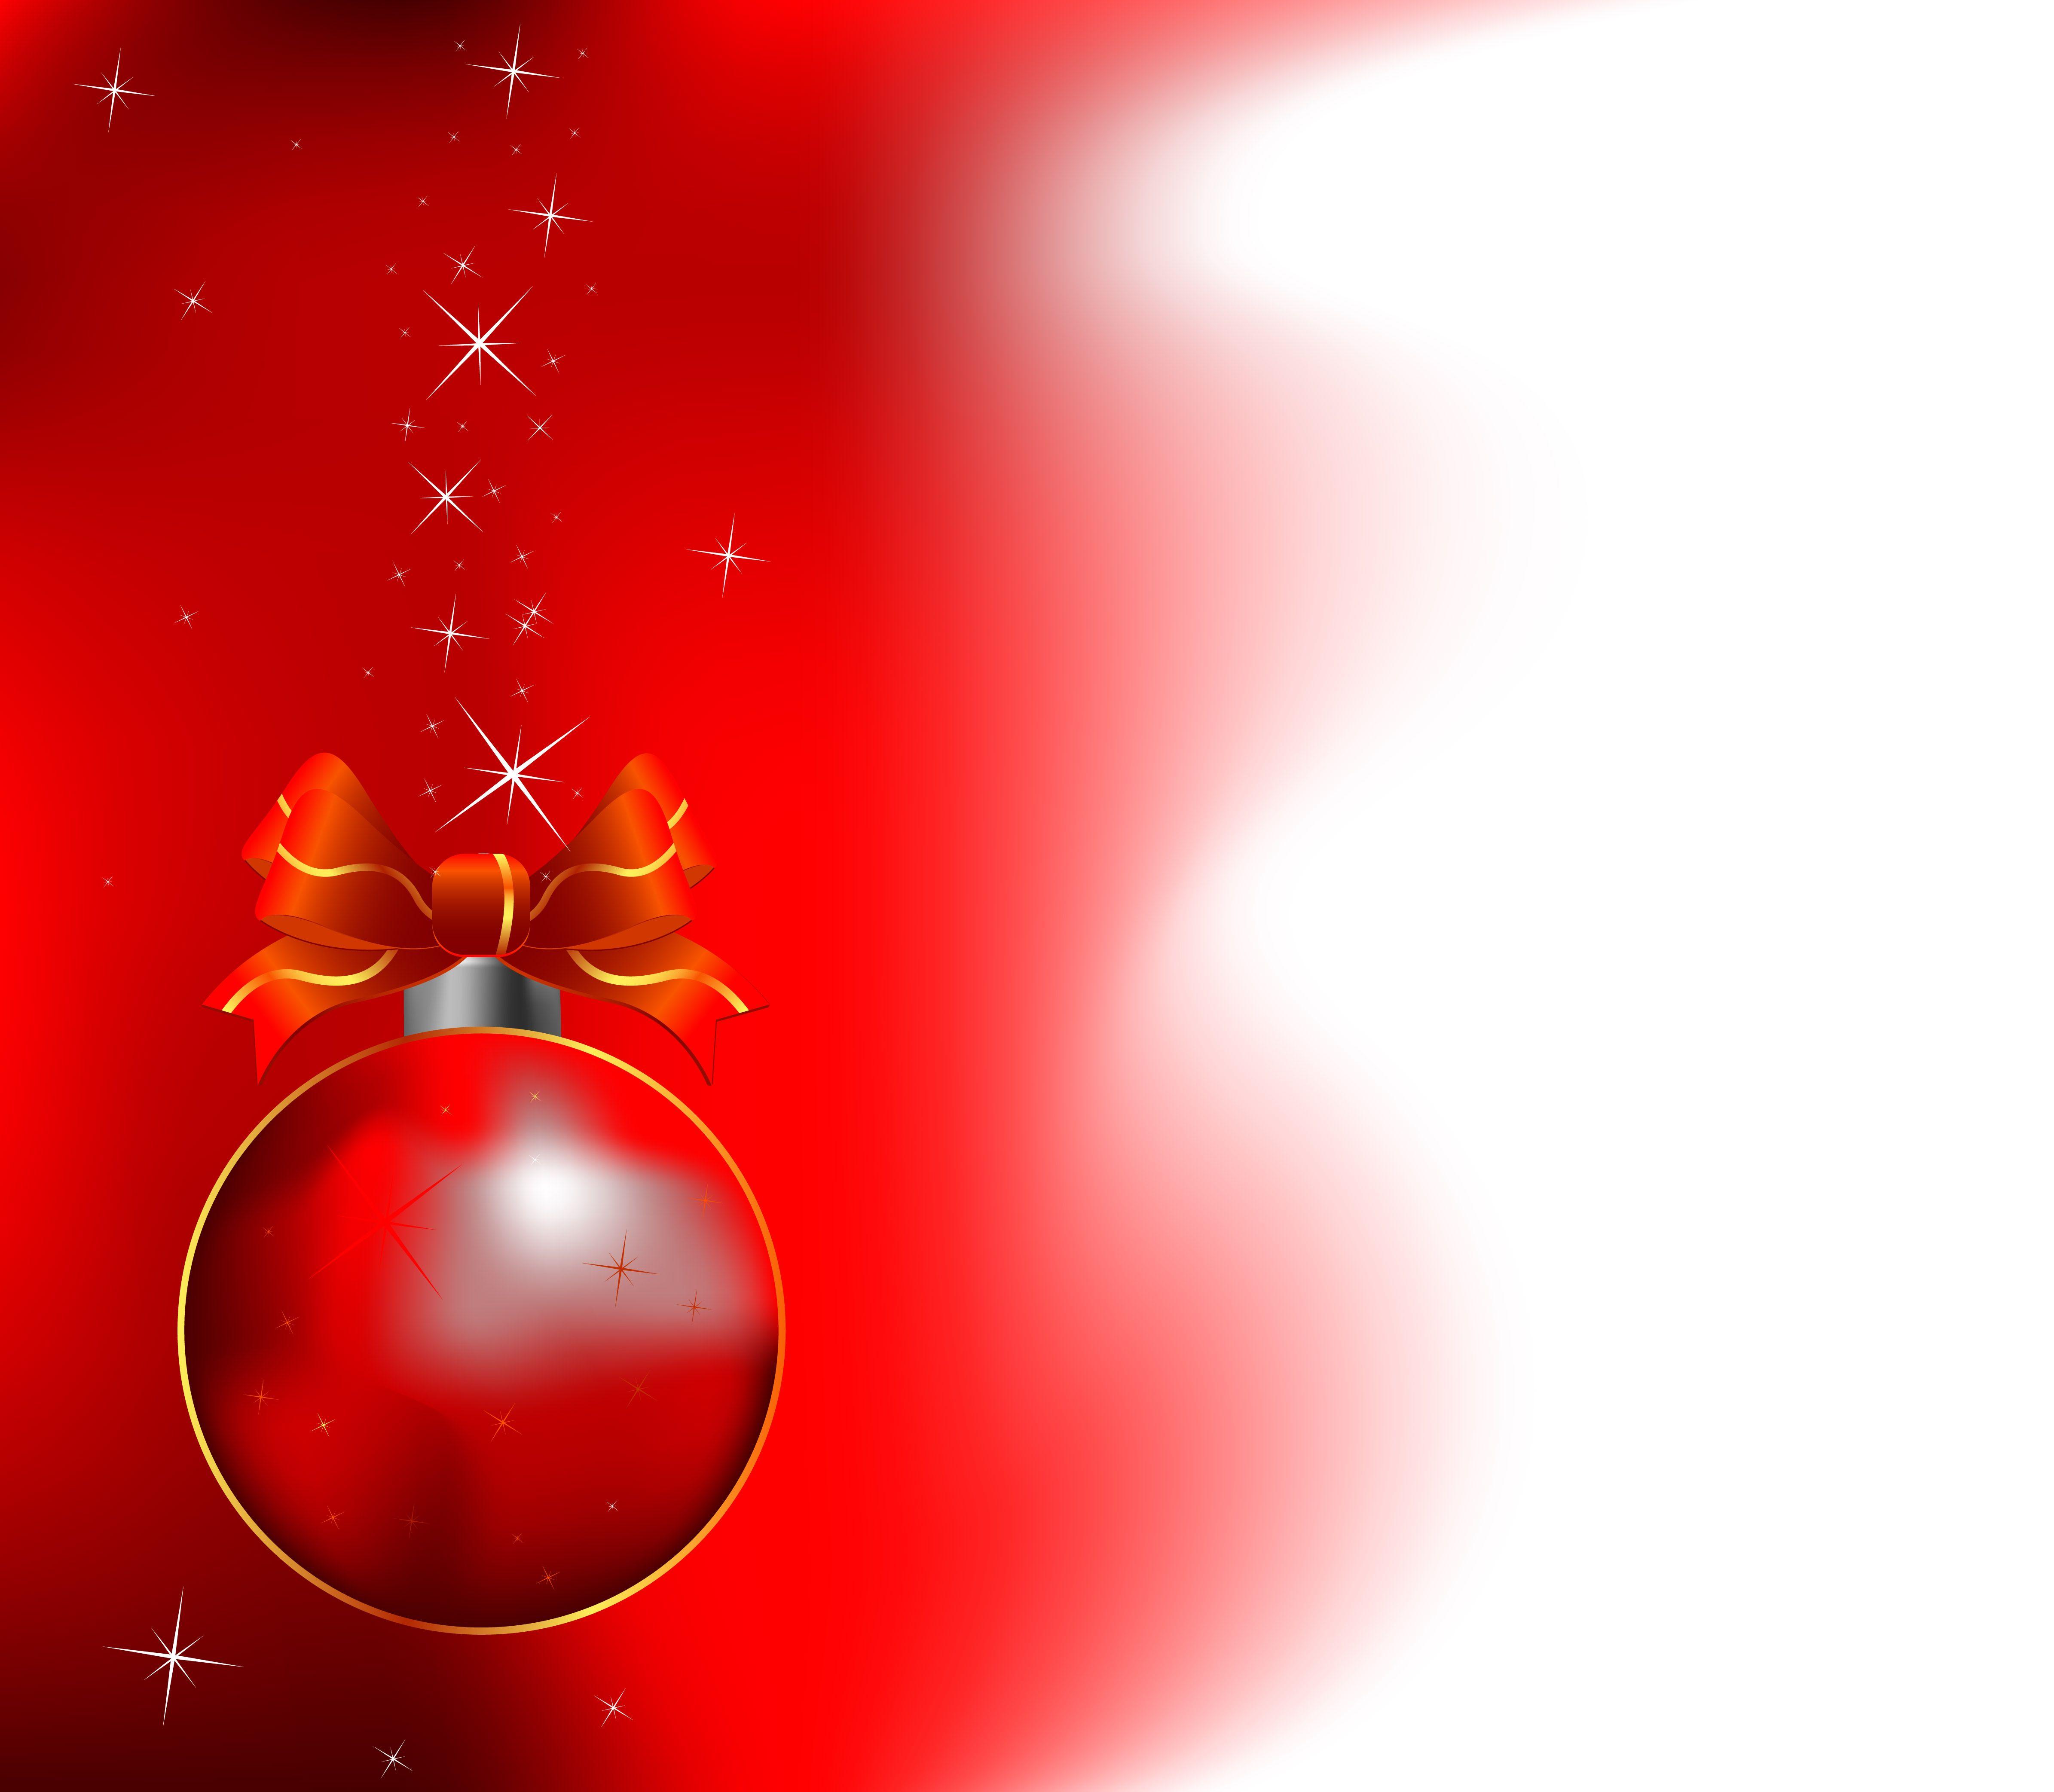 Red holiday background vector Free Vector / 4Vector